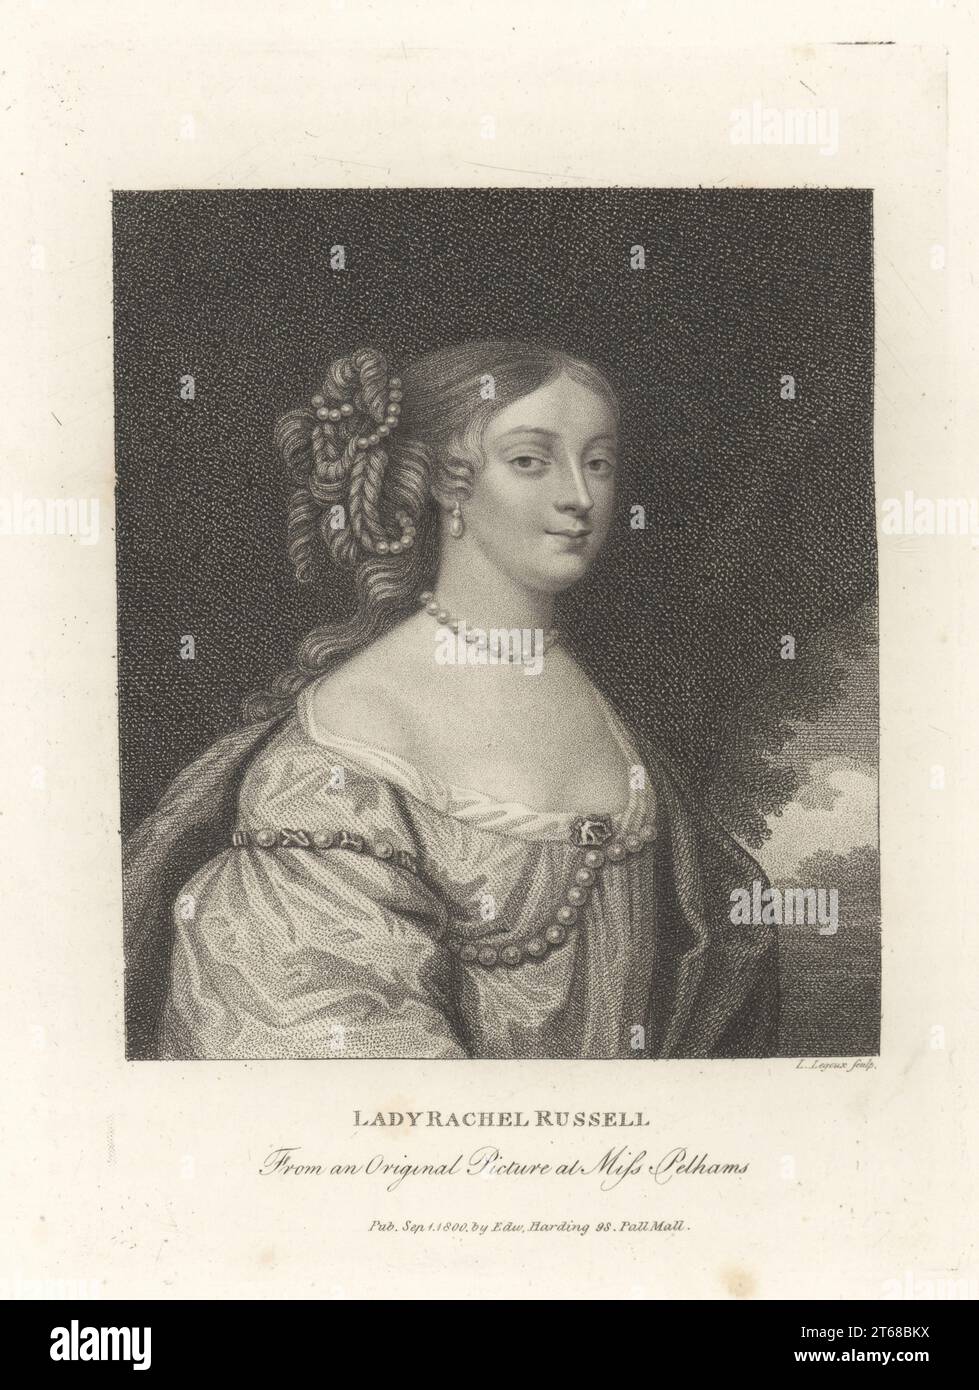 Rachel, Lady Russell, English noblewoman, heiress, and author c.1636-1723, Her second husband William, Lord Russell, was implicated in the Rye House Plot and executed in 1683. With pearls in her hair, low-cut gown. Lady Rachel Russell. After an original picture at Miss Pelhams. Copperplate engraving by Louis Legoux from John Adolphus The British Cabinet, containing Portraits of Illustrious Personages, printed by T. Bensley for E. Harding, 98 Pall Mall, London, 1800. Stock Photo